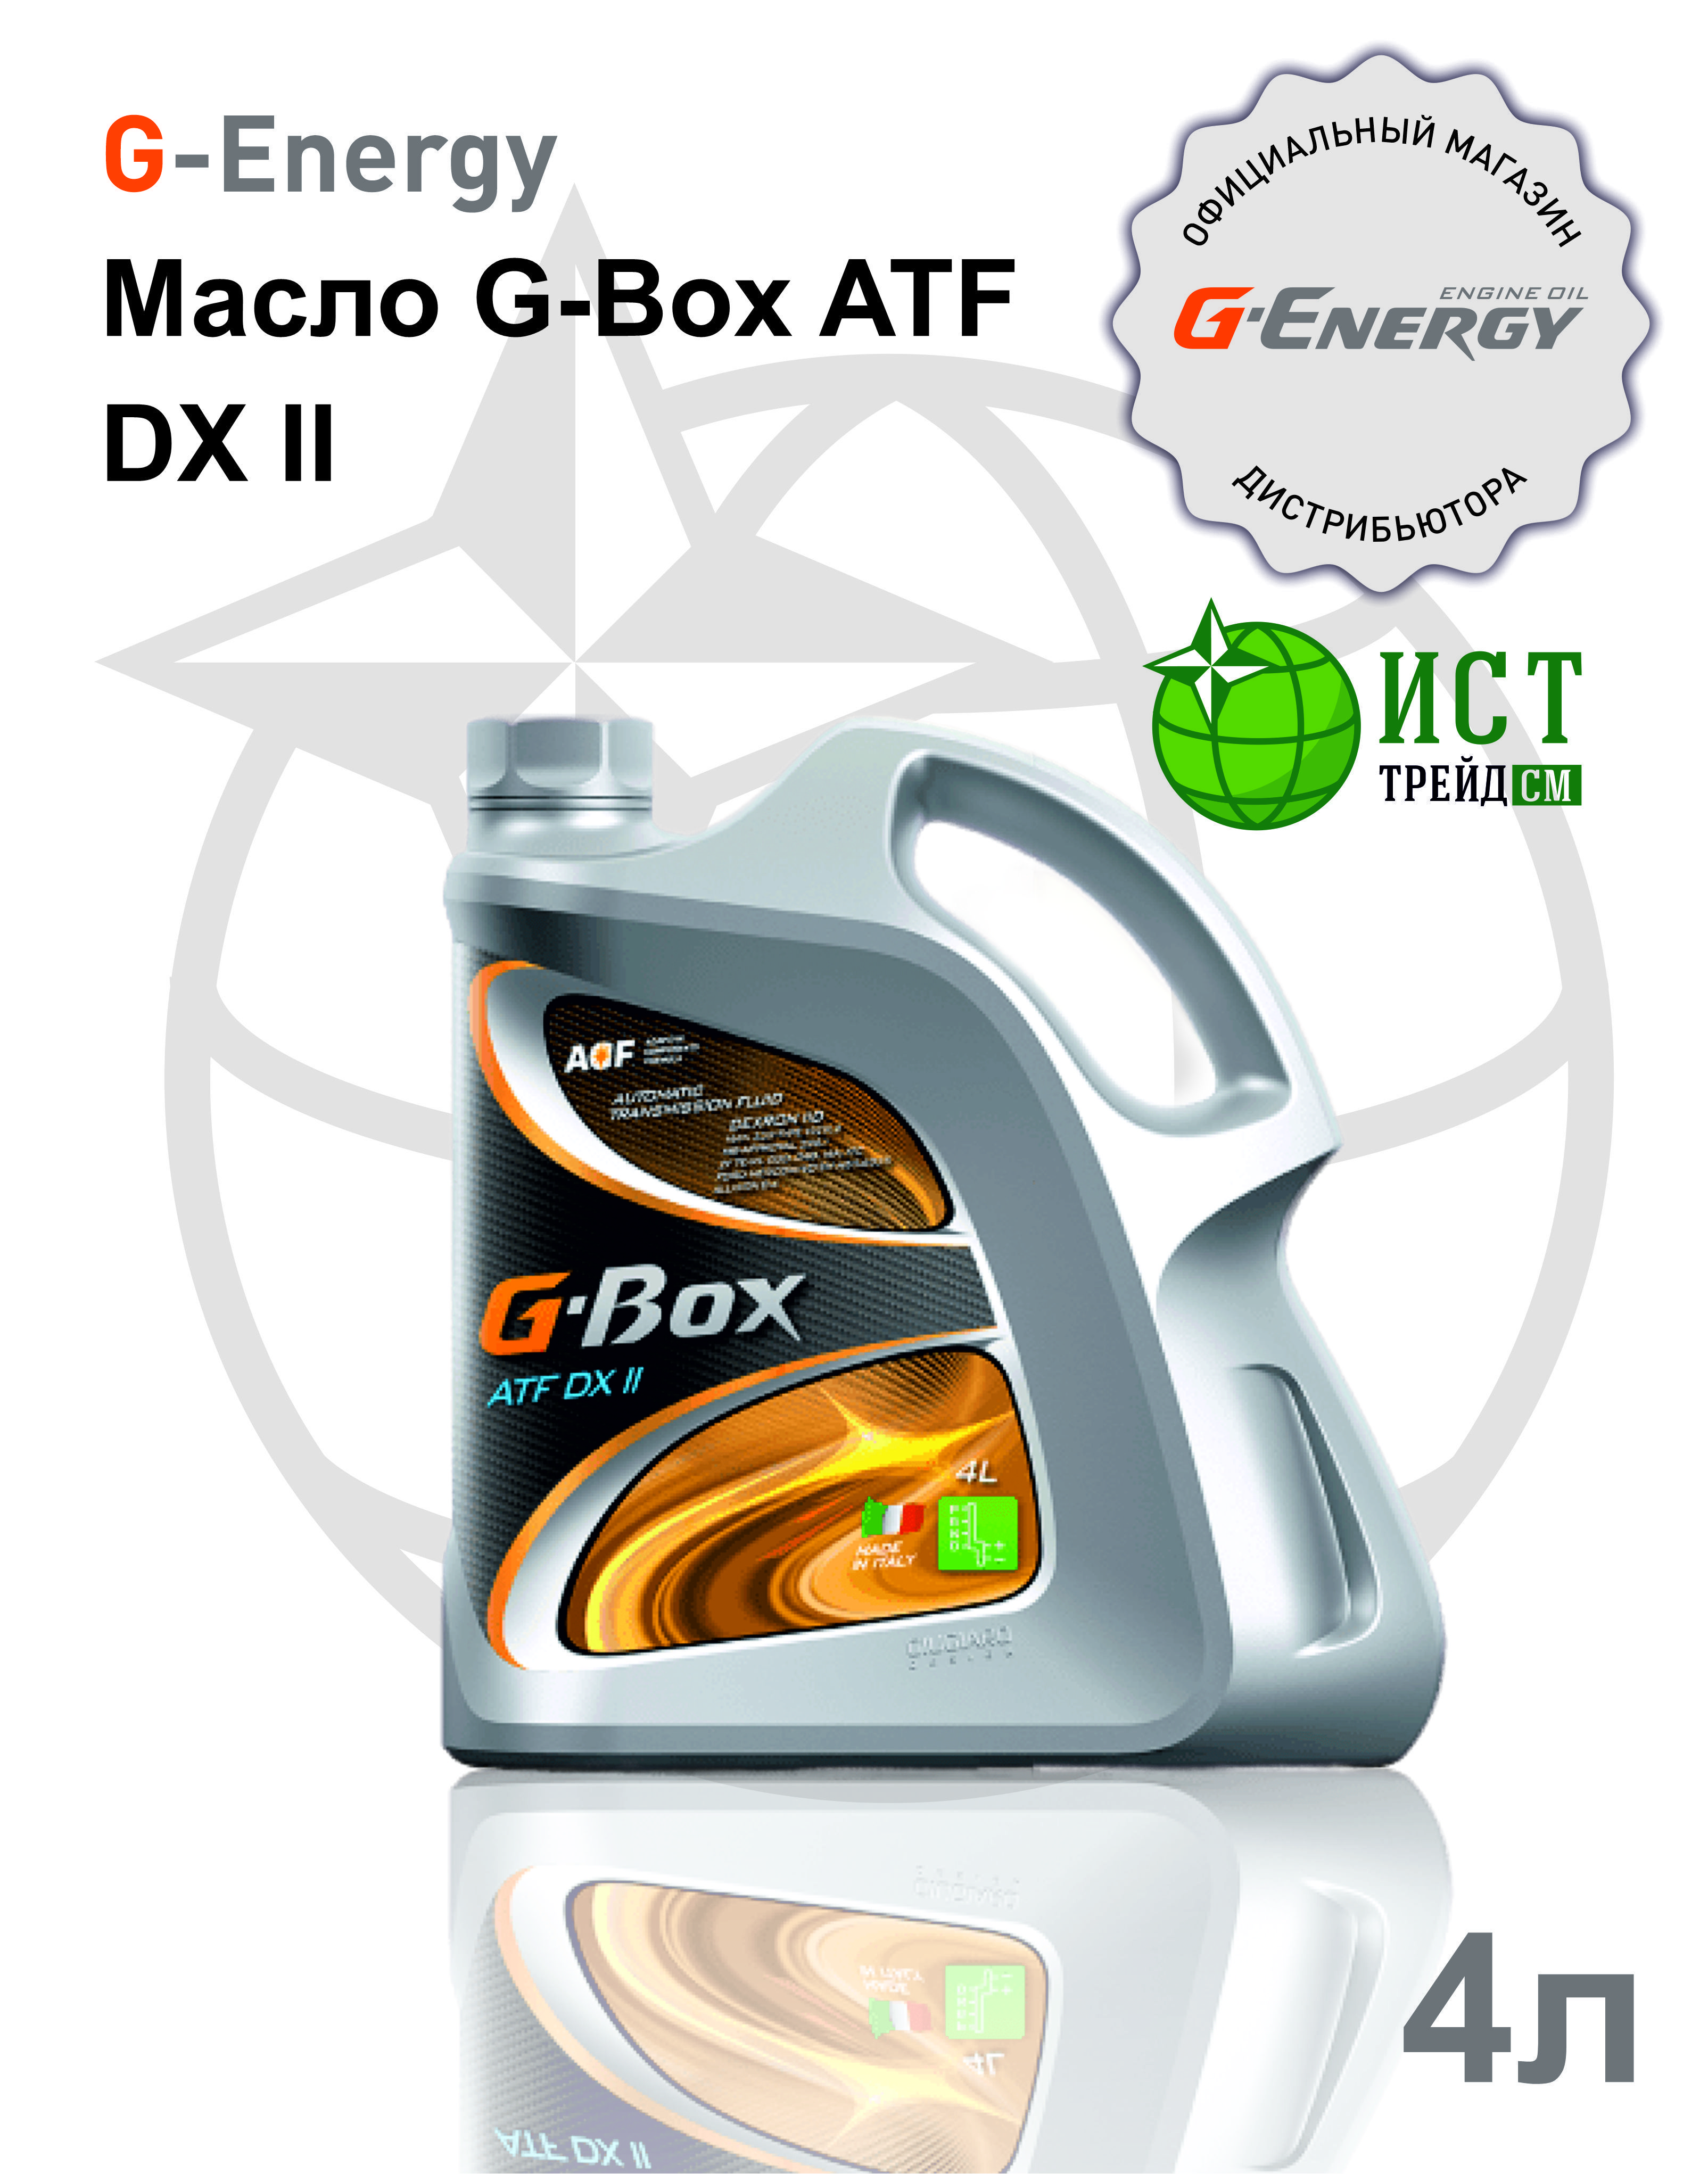 Масло g box atf. Масло транс. П/С. G-Box ATF DX II (1л). Gazpromneft g-Box ATF DX vi. G-Box ATF far East. G-Energy g-Box ATF DX II 20л.